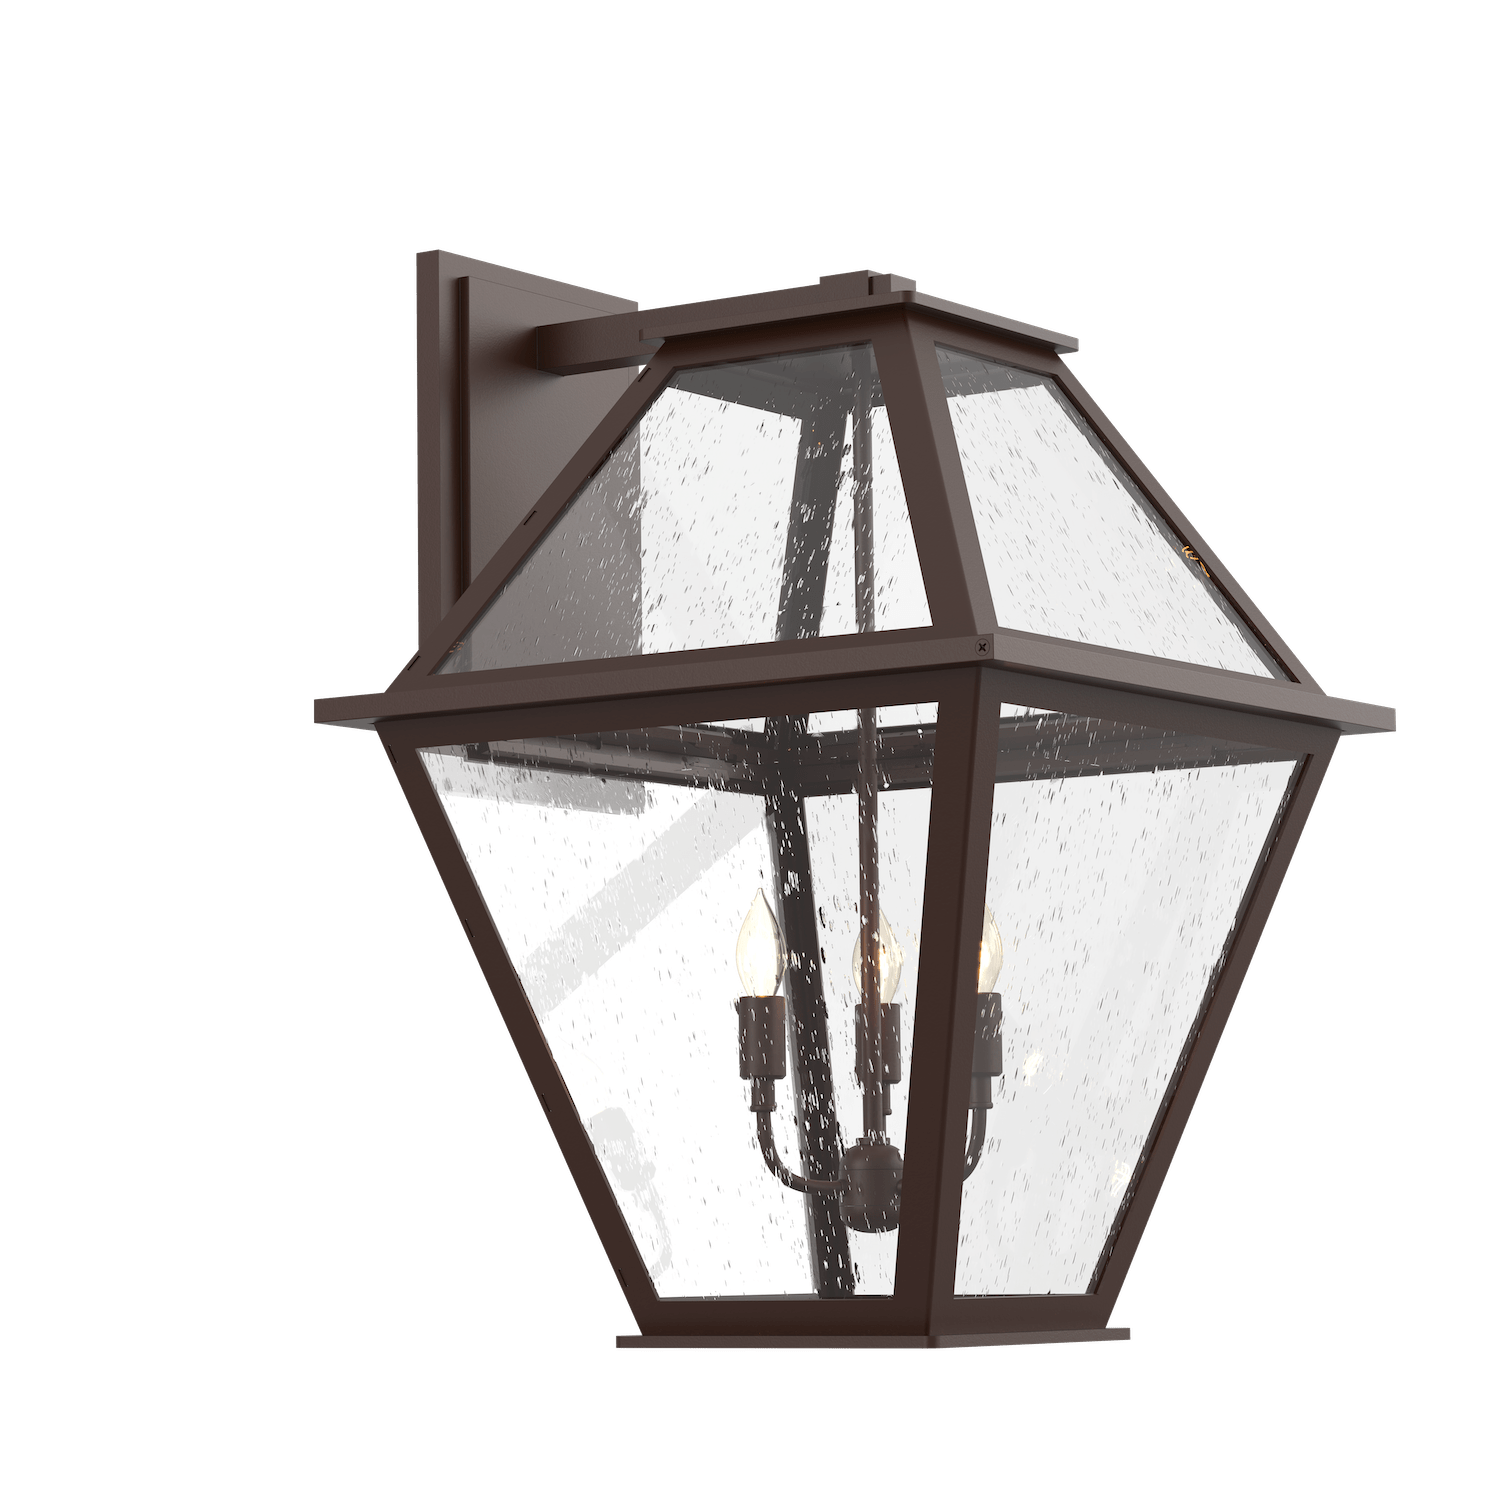 ODB0072-01-SB-CS-Hammerton-Studio-Terrace-24-inch-outdoor-candelabra-lantern-with-statuary-bronze-finish-and-clear-glass-shade-and-incandescent-lamping